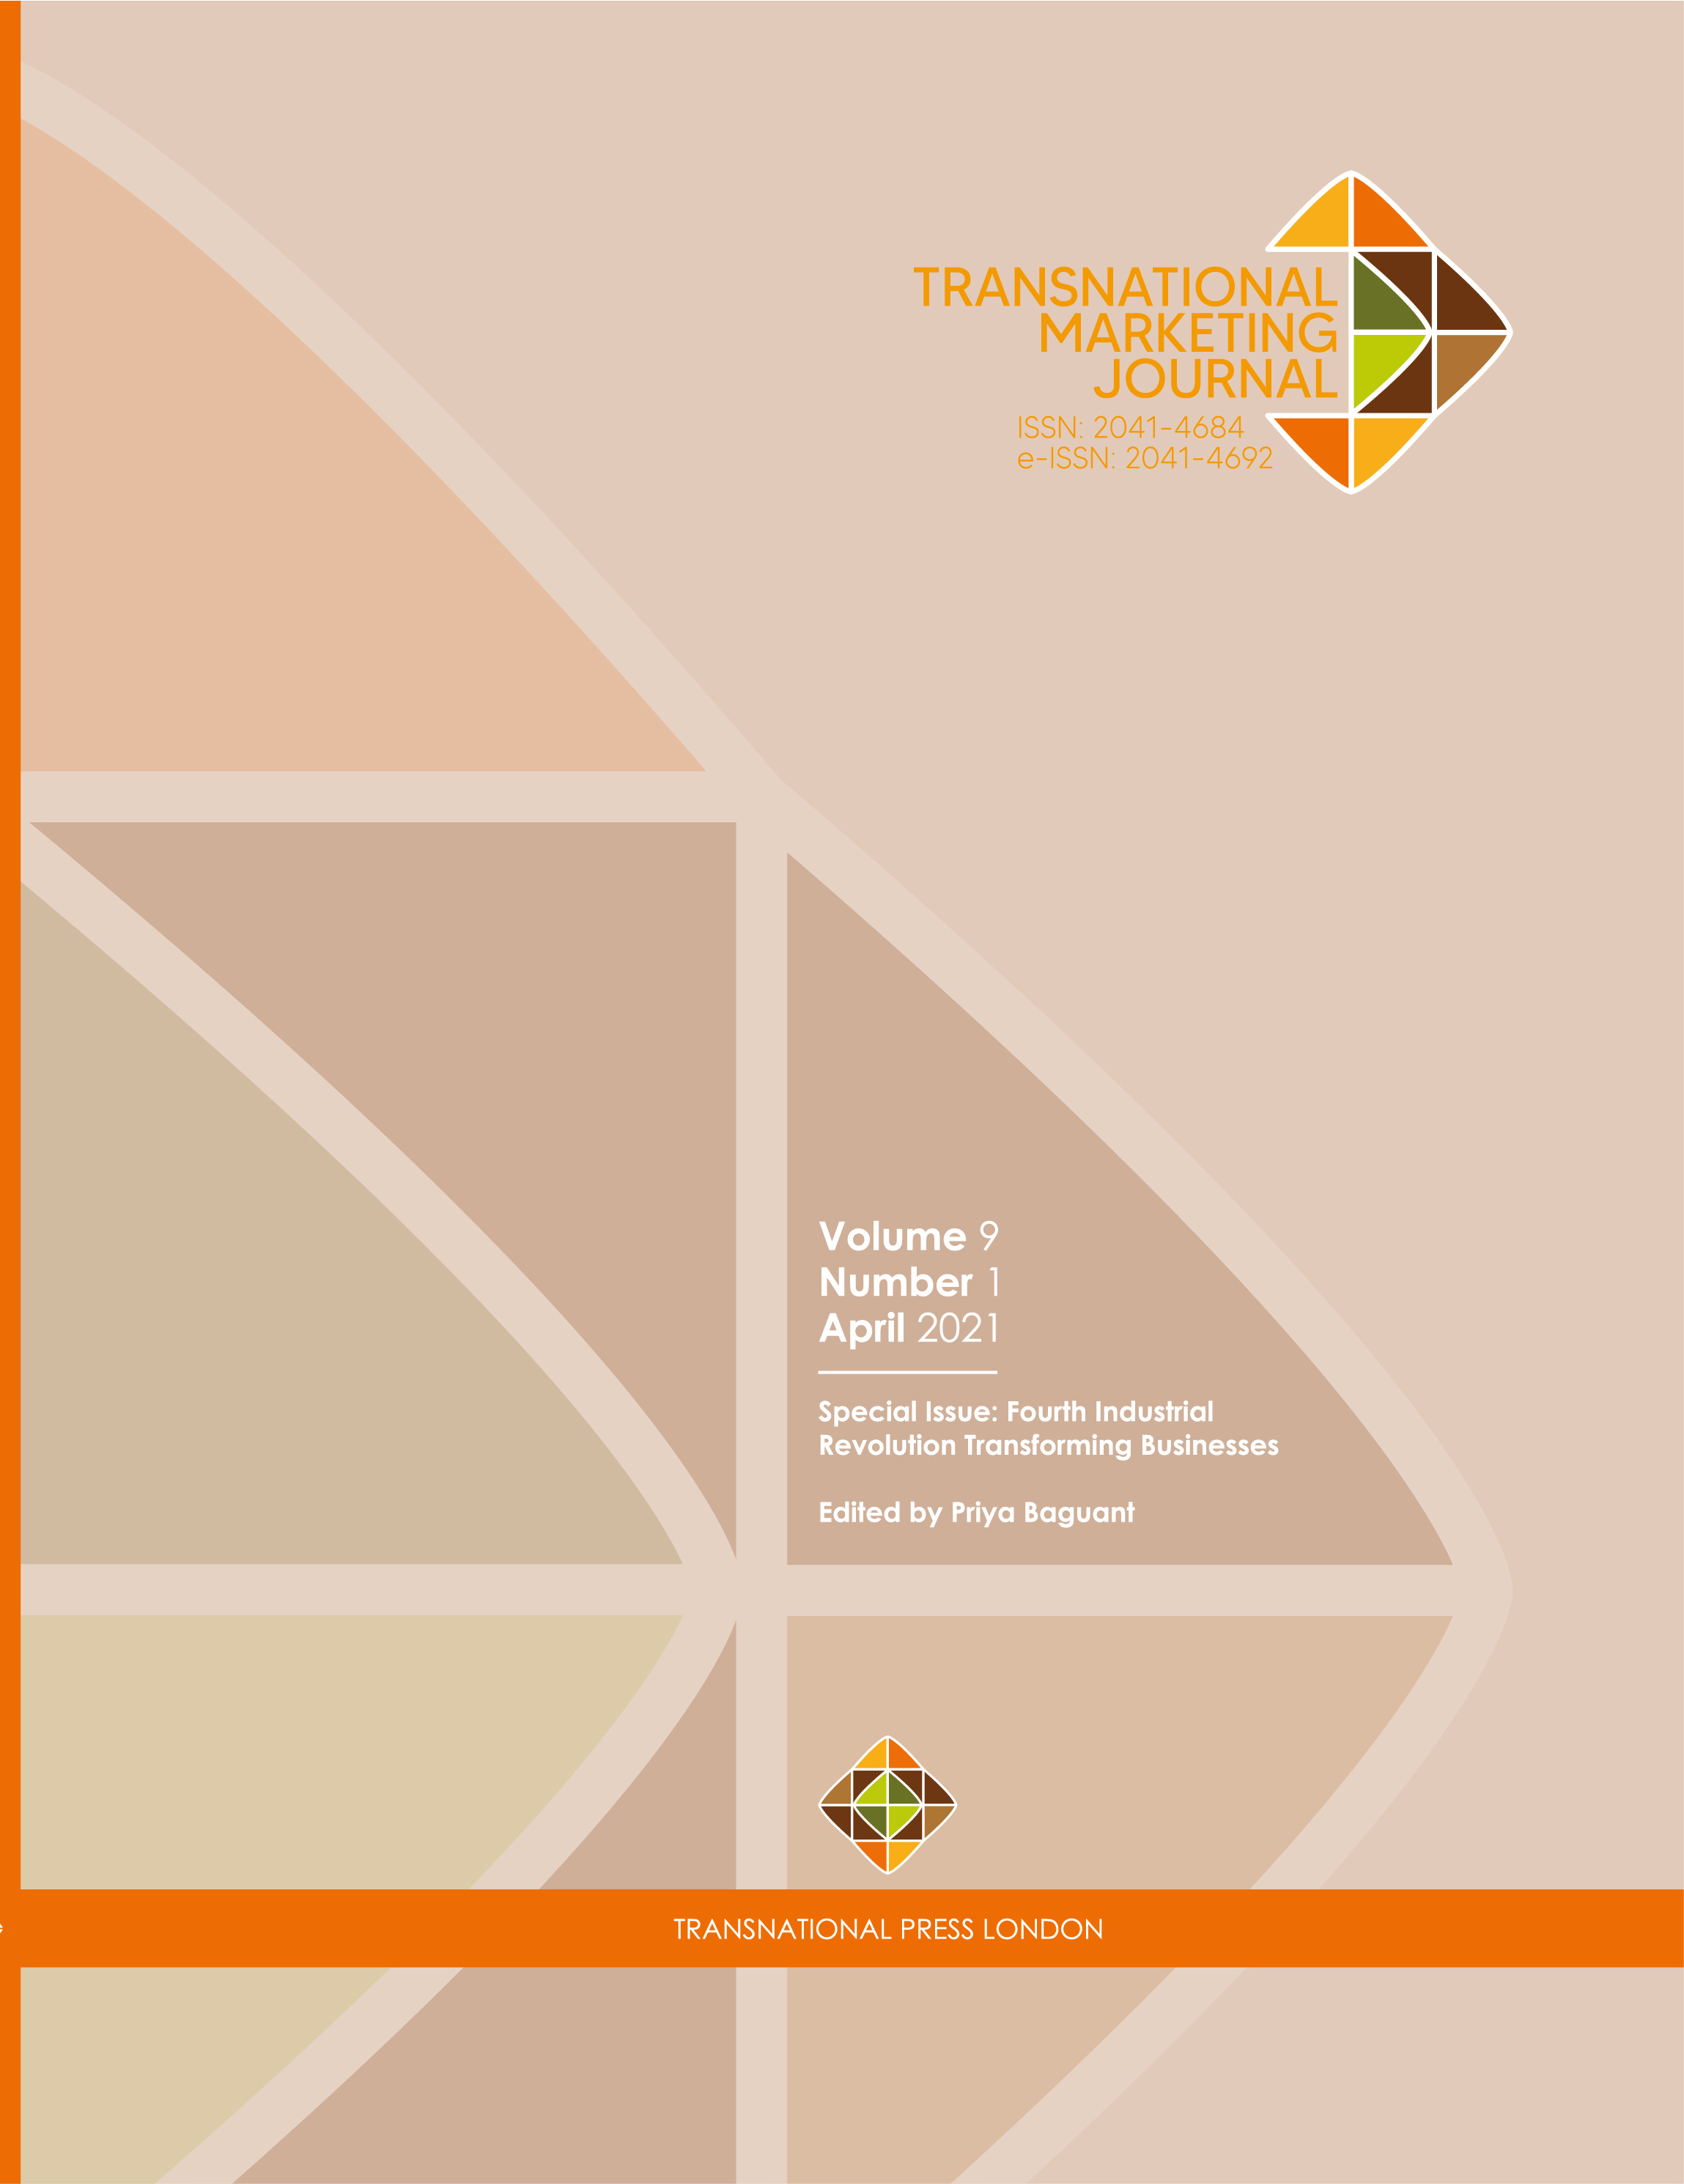 Influence of Mall Shopping Culture on Online Shopping Preferences: An Emerging Economy Perspective using the Technology Acceptance Model Cover Image